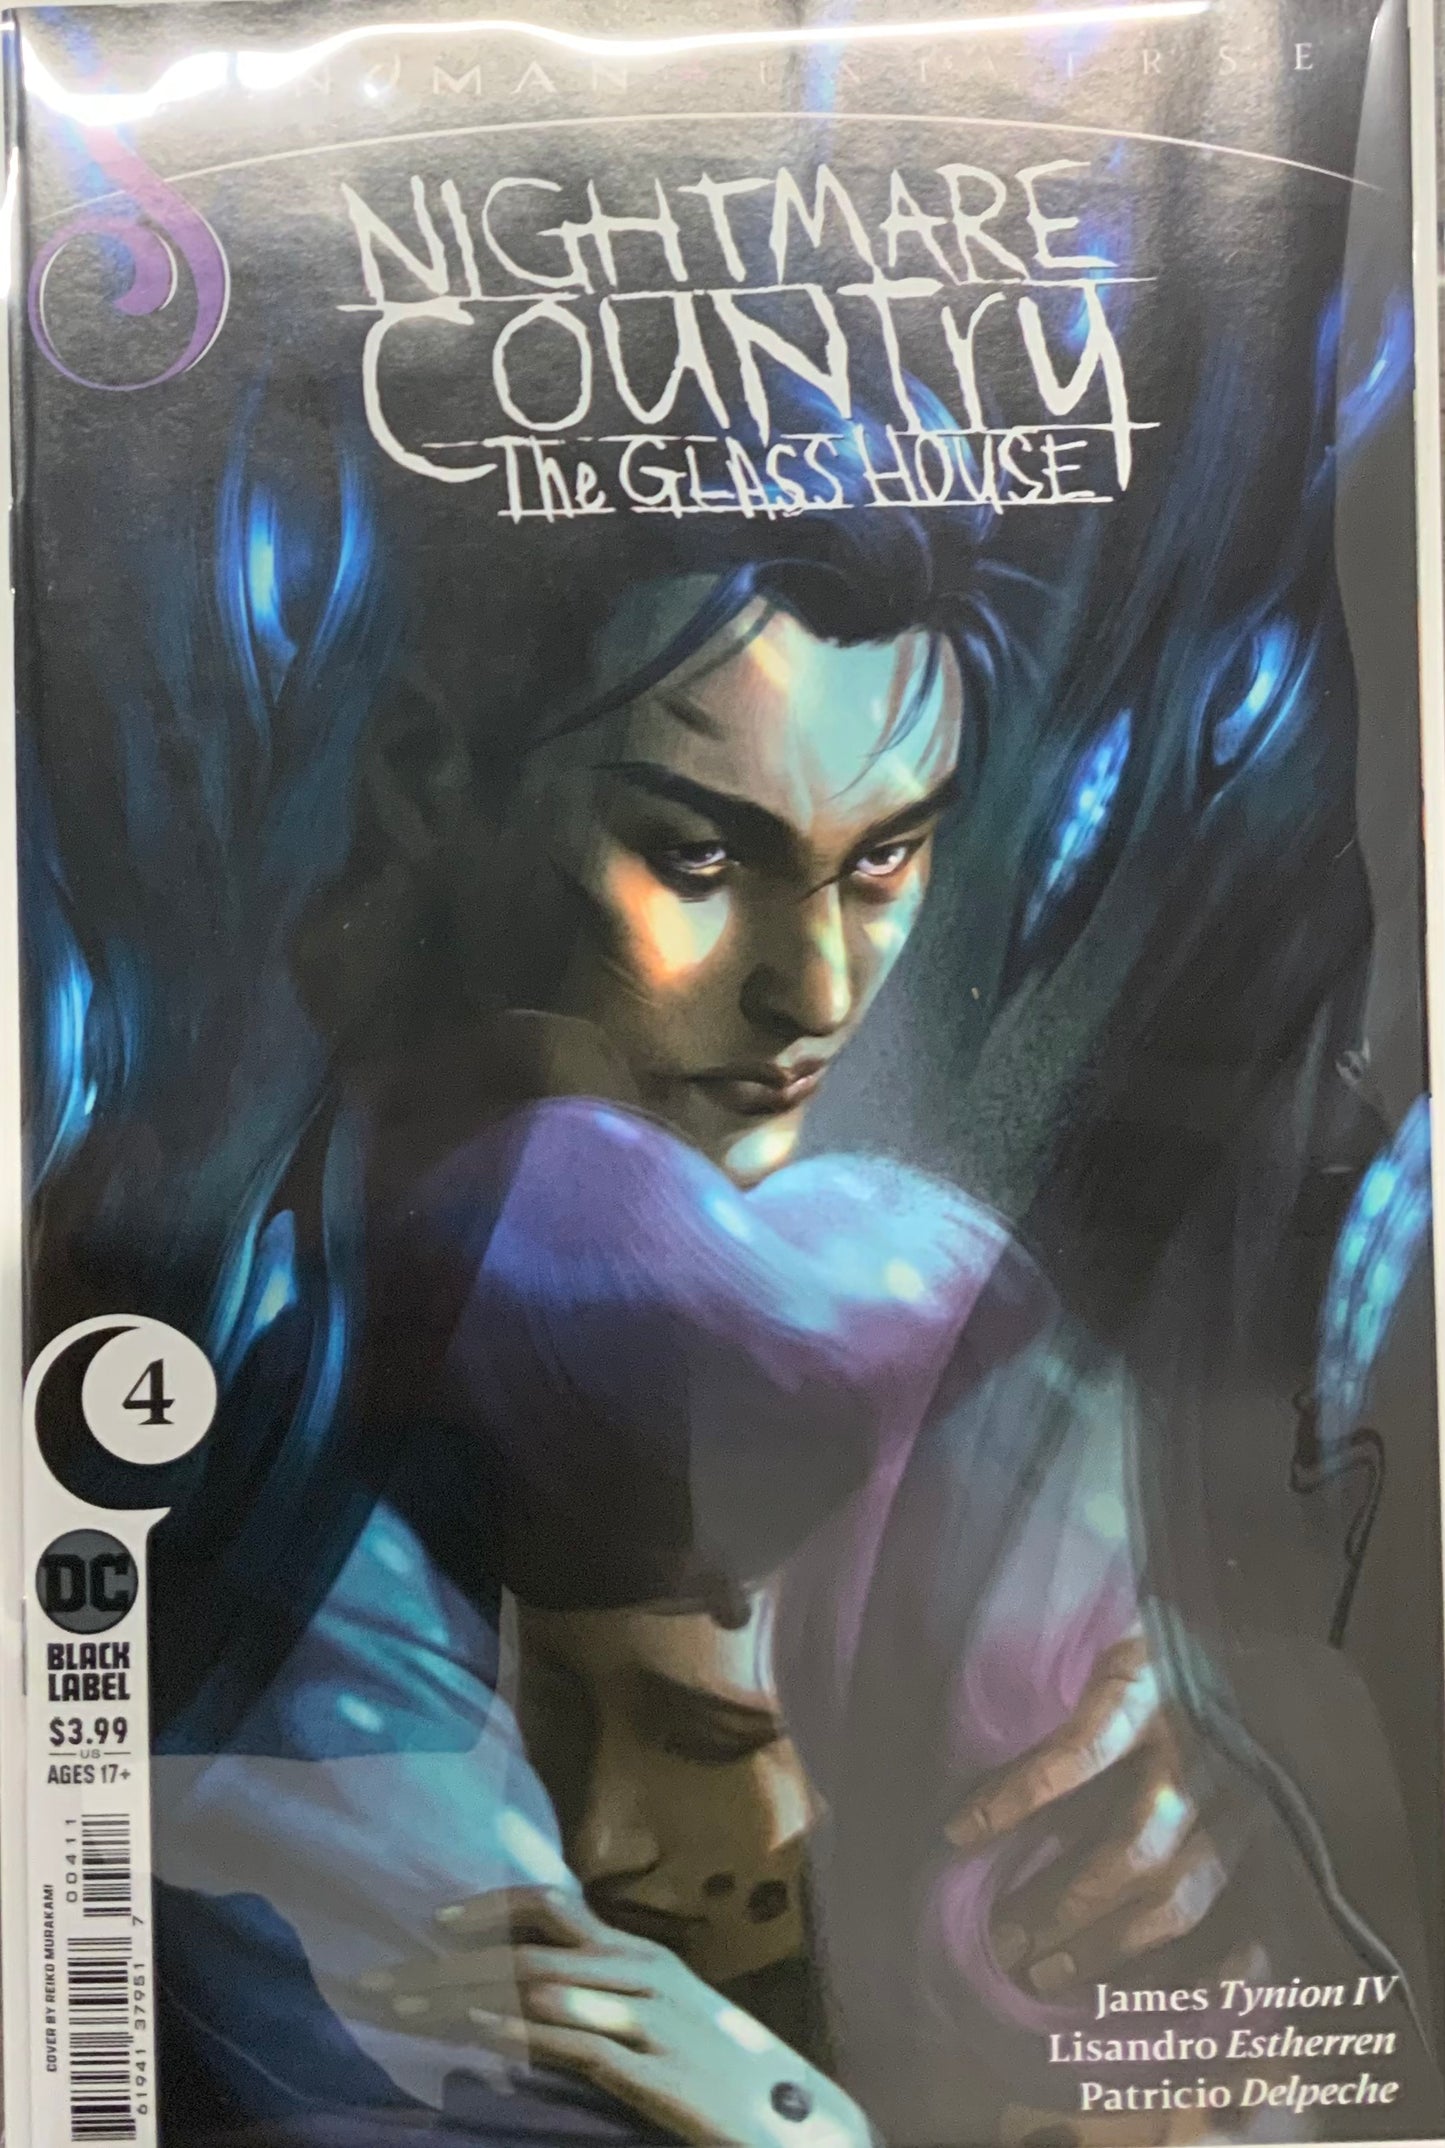 Sandman Universe: Nightmare Country - The Glass House vol 4